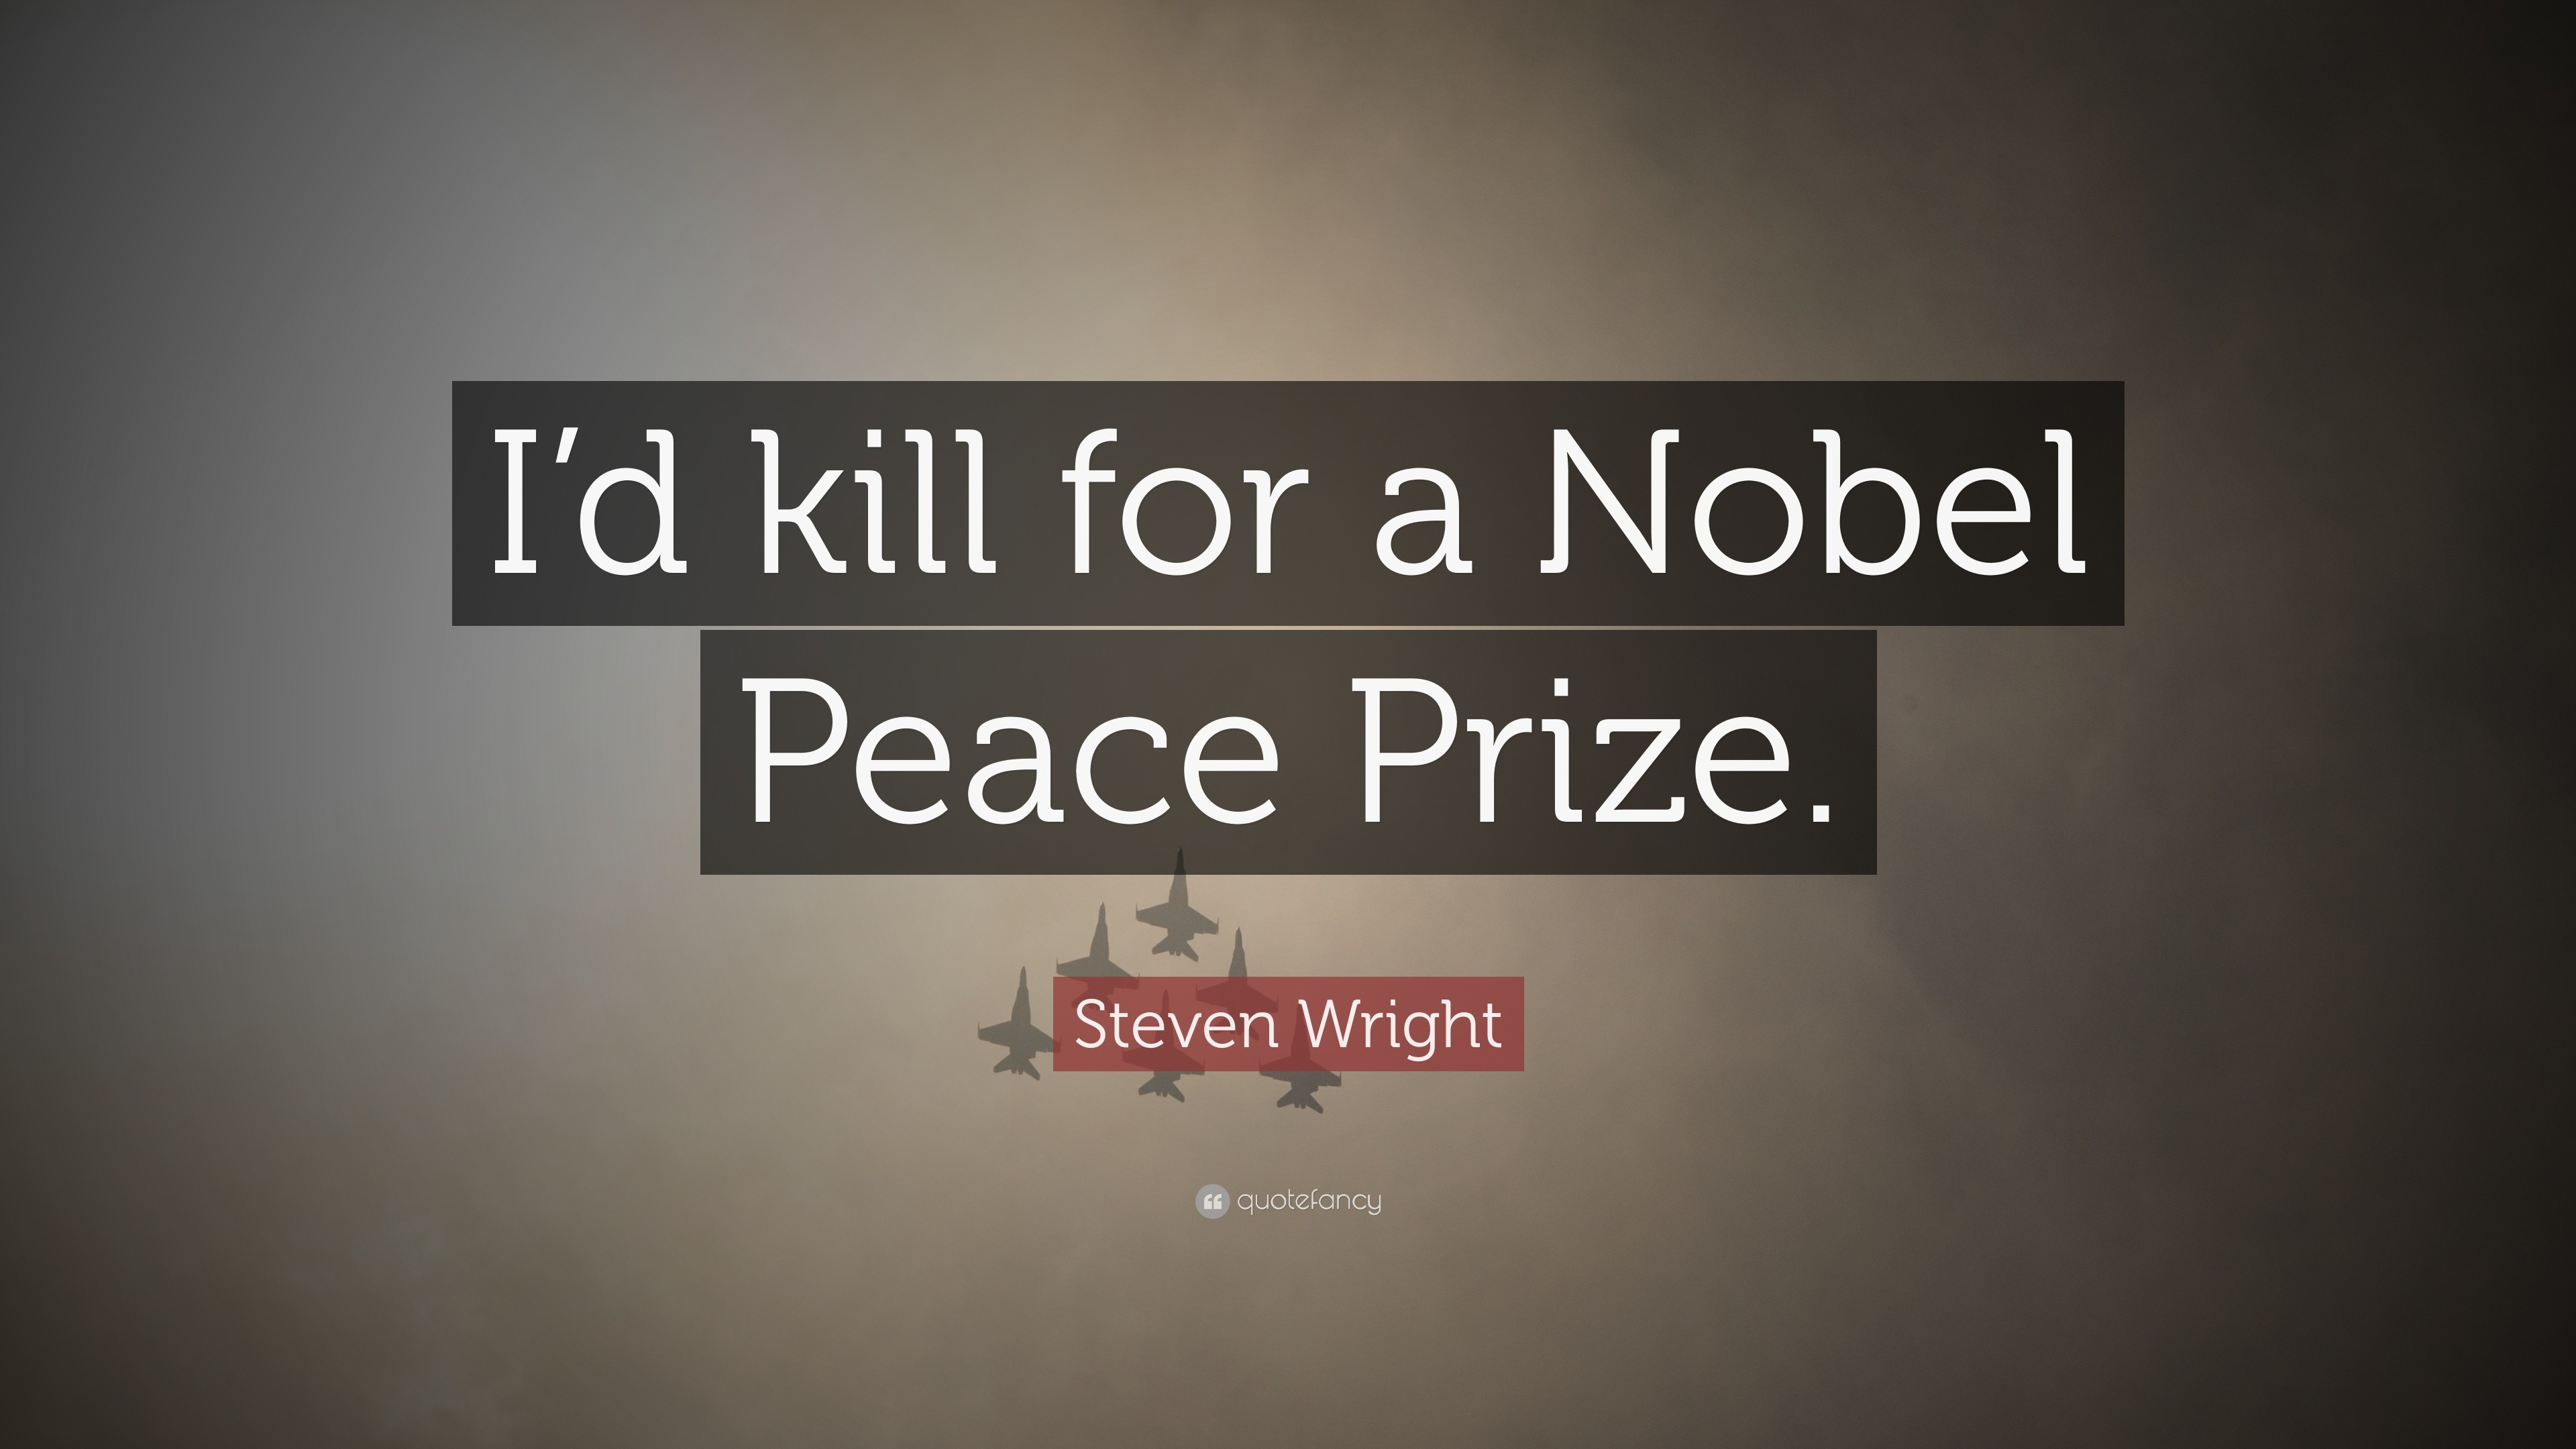 3840x2160 Funny Quotes: “I'd kill for a Nobel Peace Prize.” —